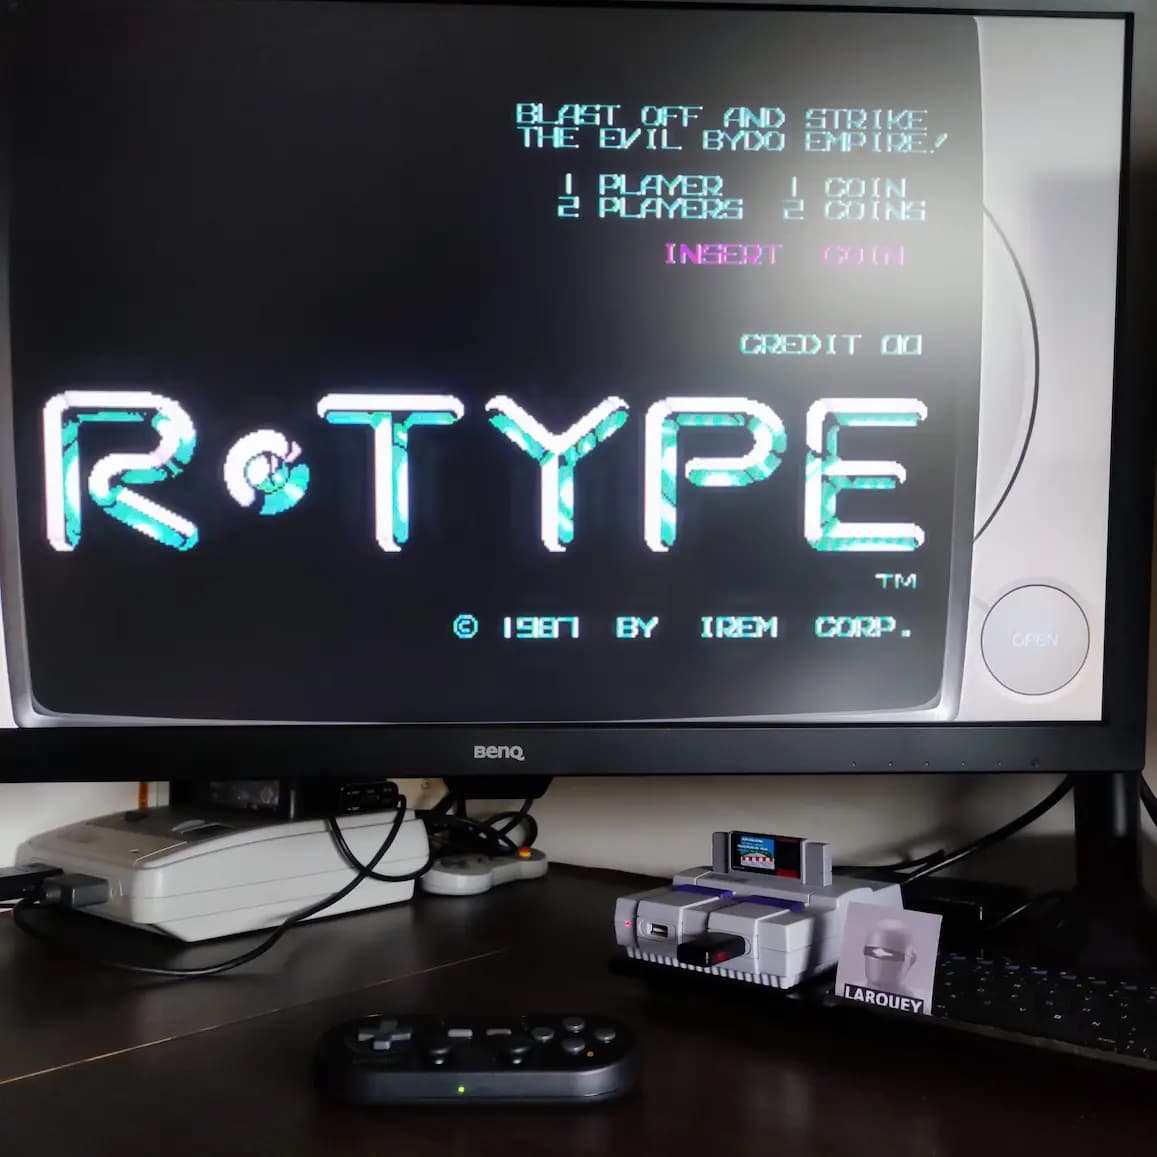 Larquey: R-Types: R-Type [2 Lives/Normal] (Playstation 1 Emulated) 43,200 points on 2022-09-04 06:12:07